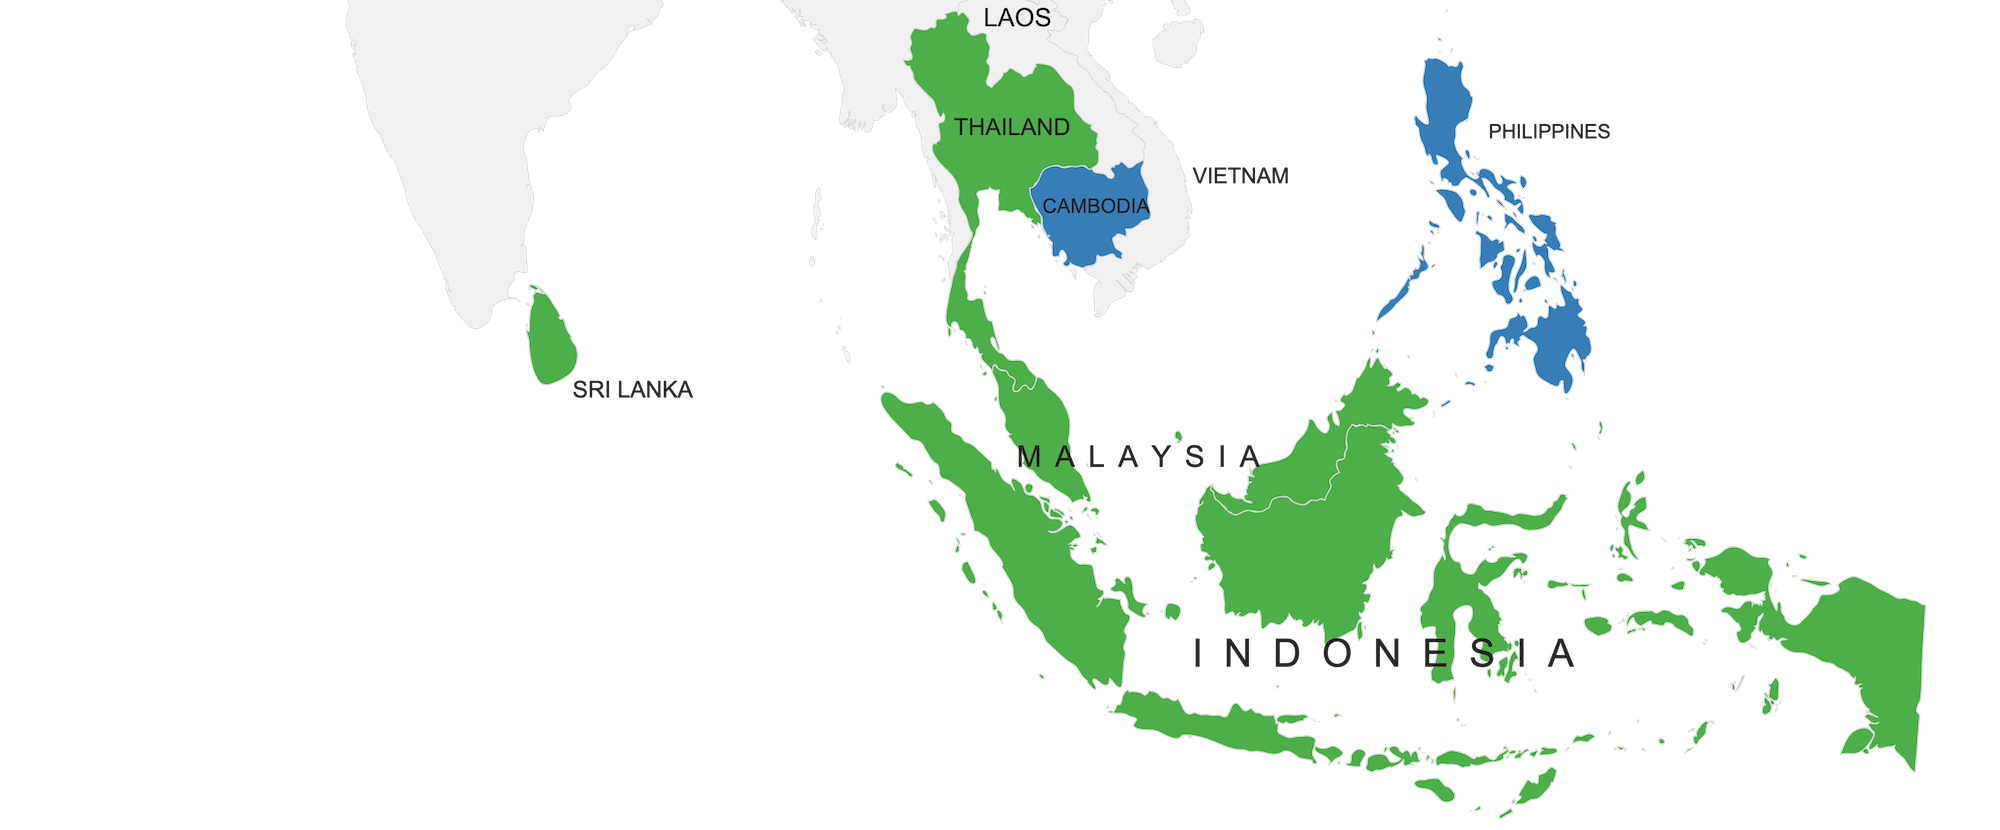 Country-guessing South-East Asia